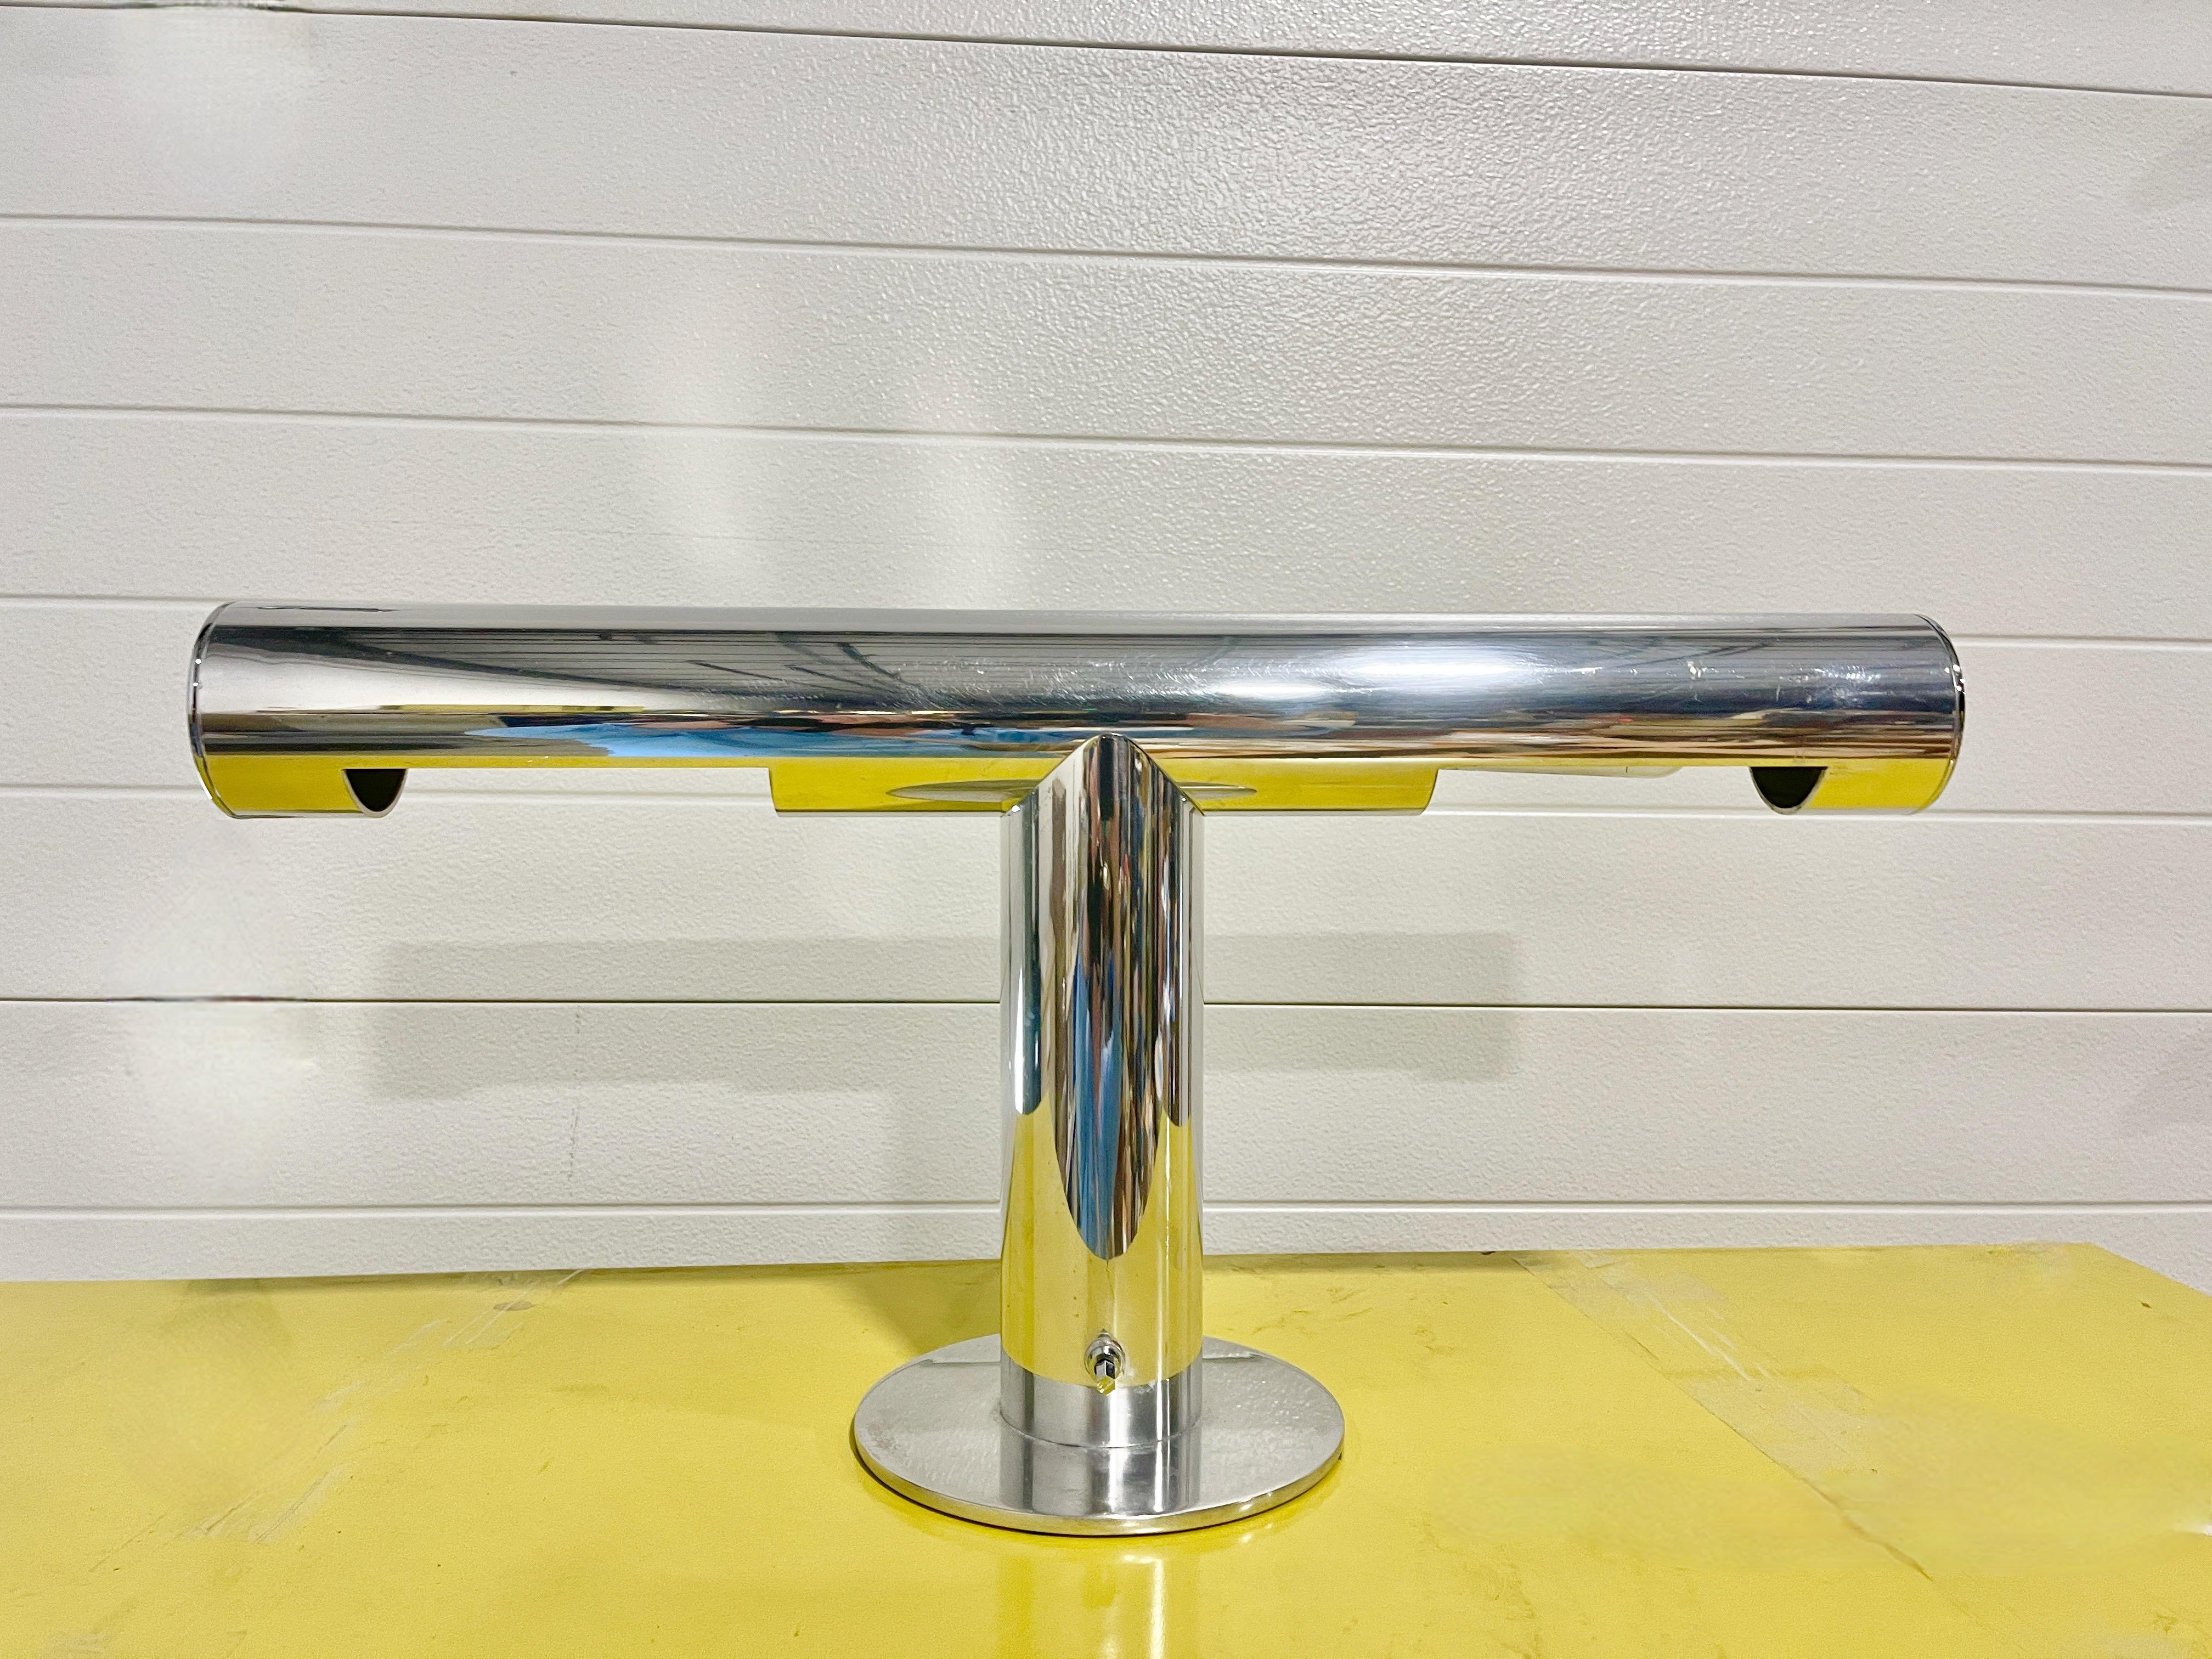 Paul Mayen aluminum tubular desk lamp for his Habitat design company (not to be confused with the UK retailer of the same name).
Polished to a mirror finish. Habitat label inside.
Takes two standard Edison screw tubular bulbs up to 75 watts